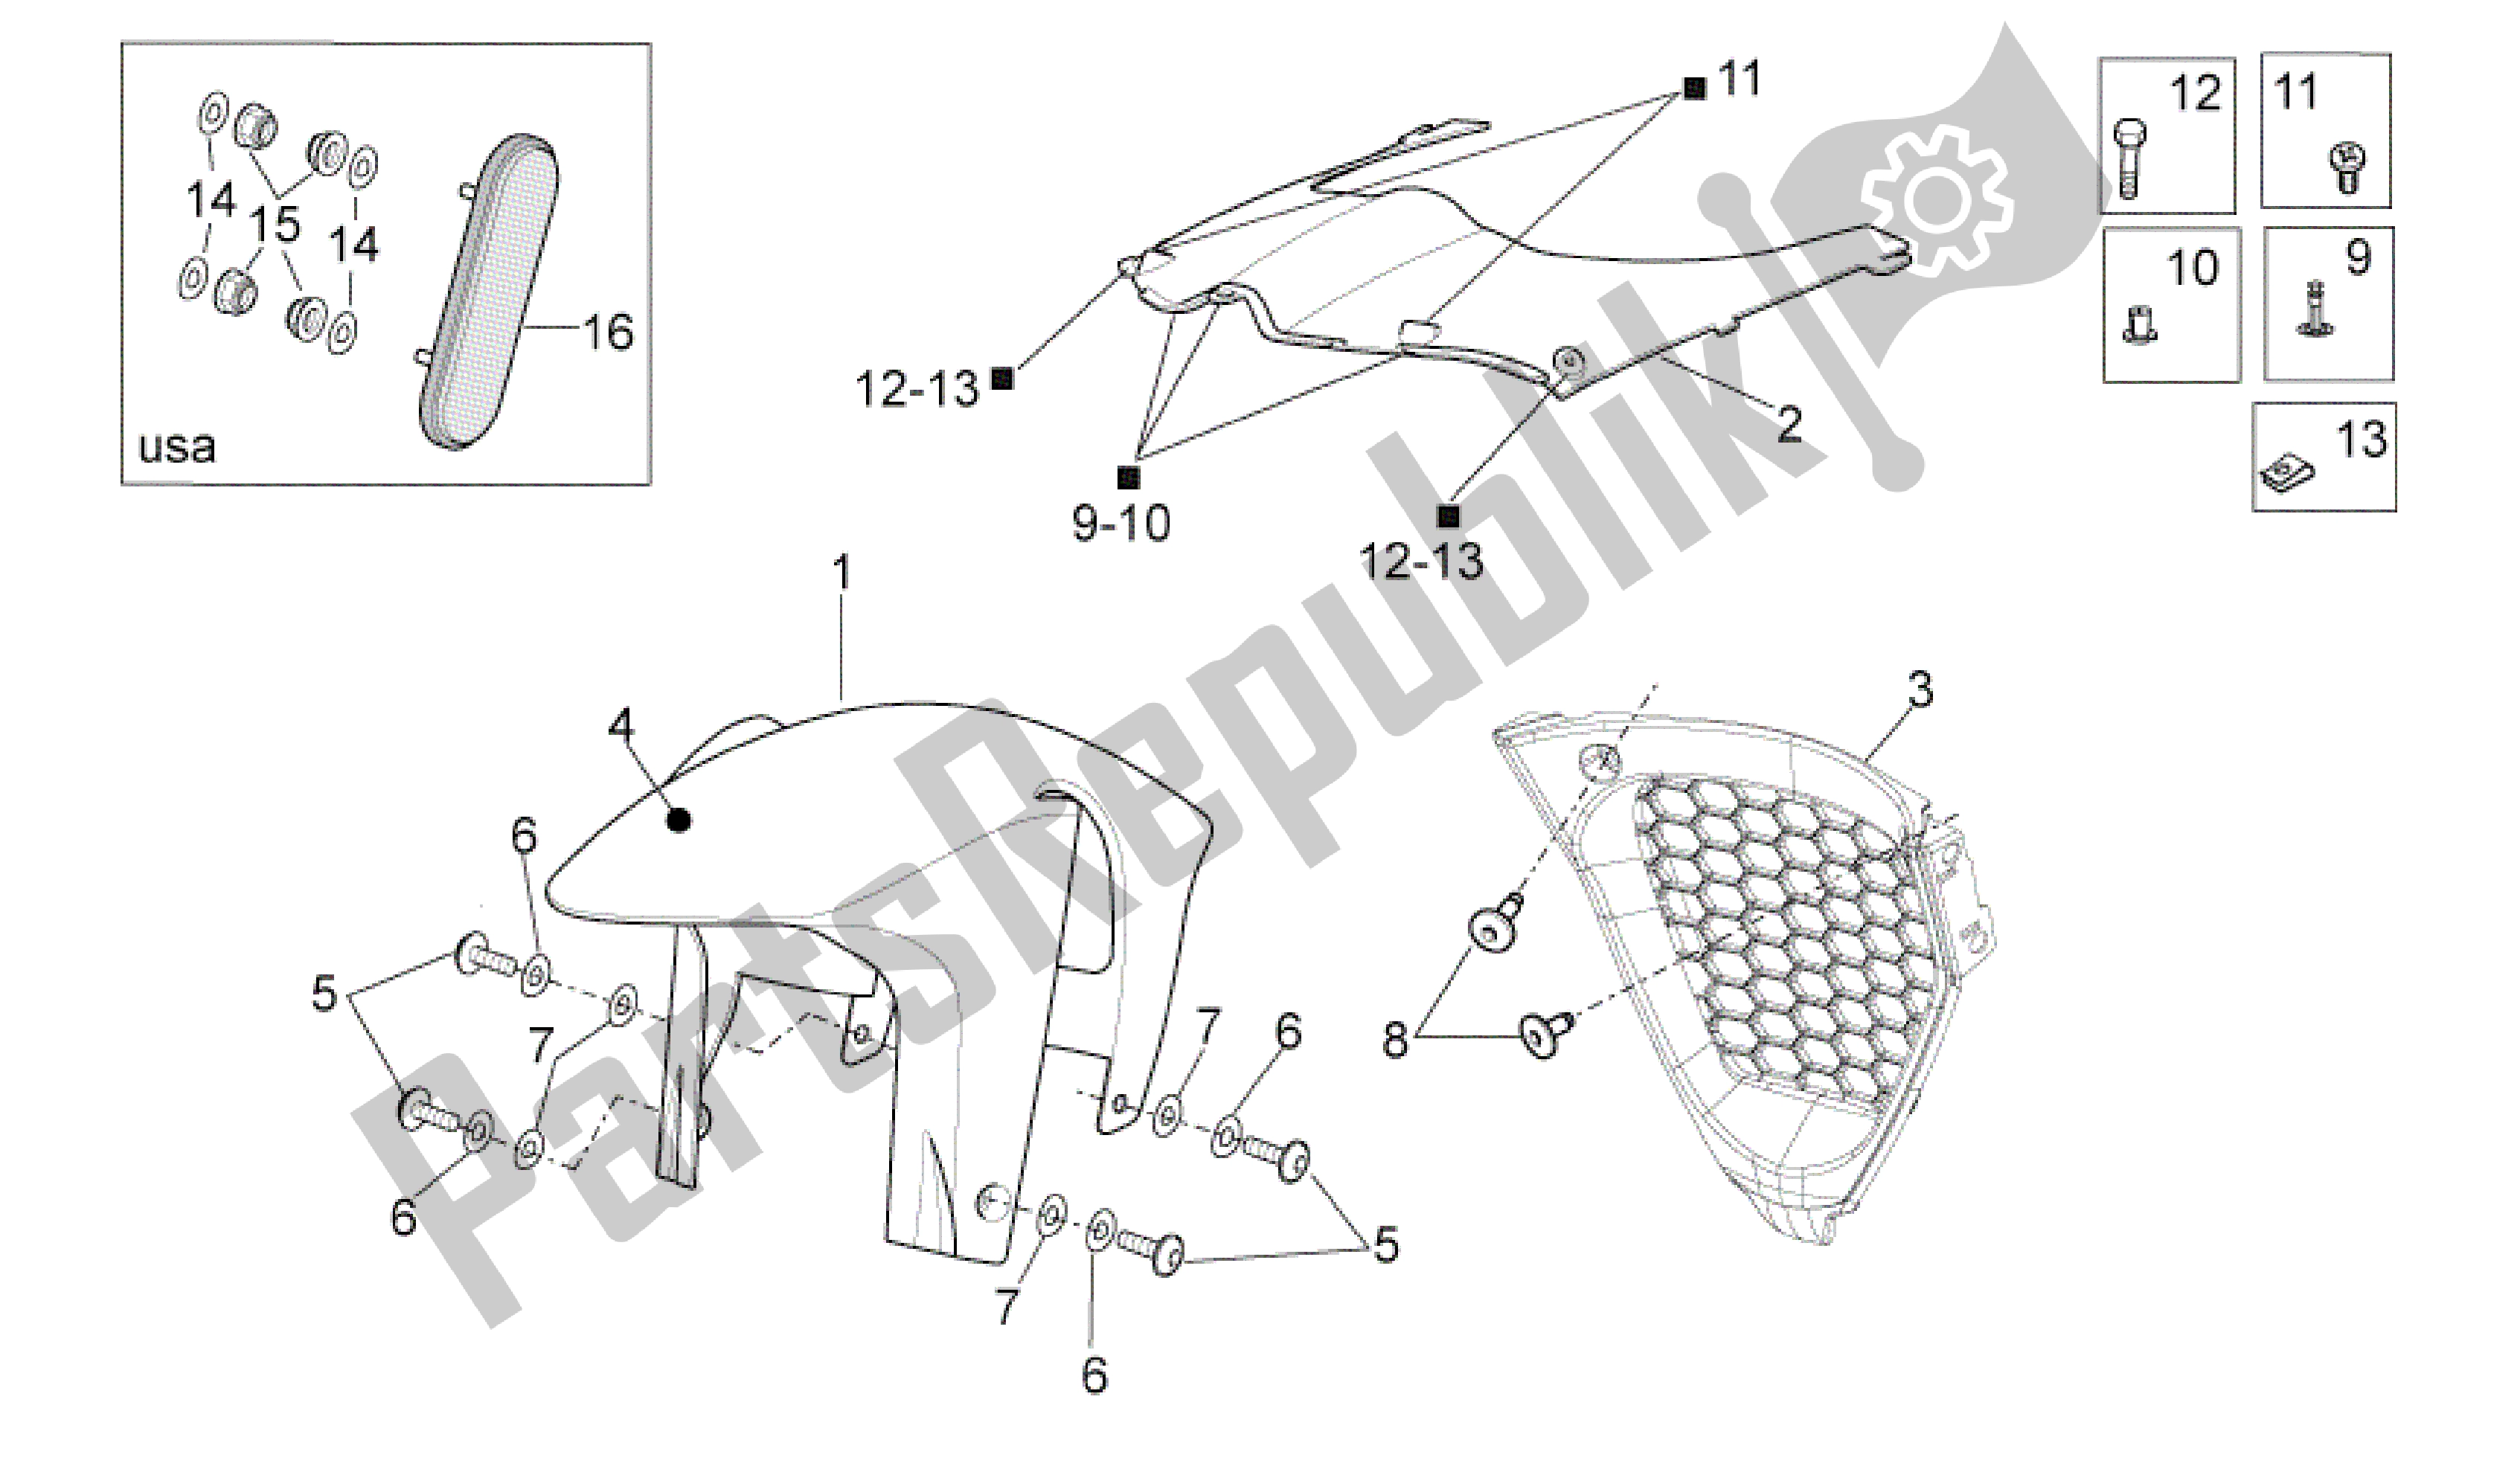 All parts for the Front Body Iii of the Aprilia RSV4 Aprc Factory 3981 1000 2011 - 2012